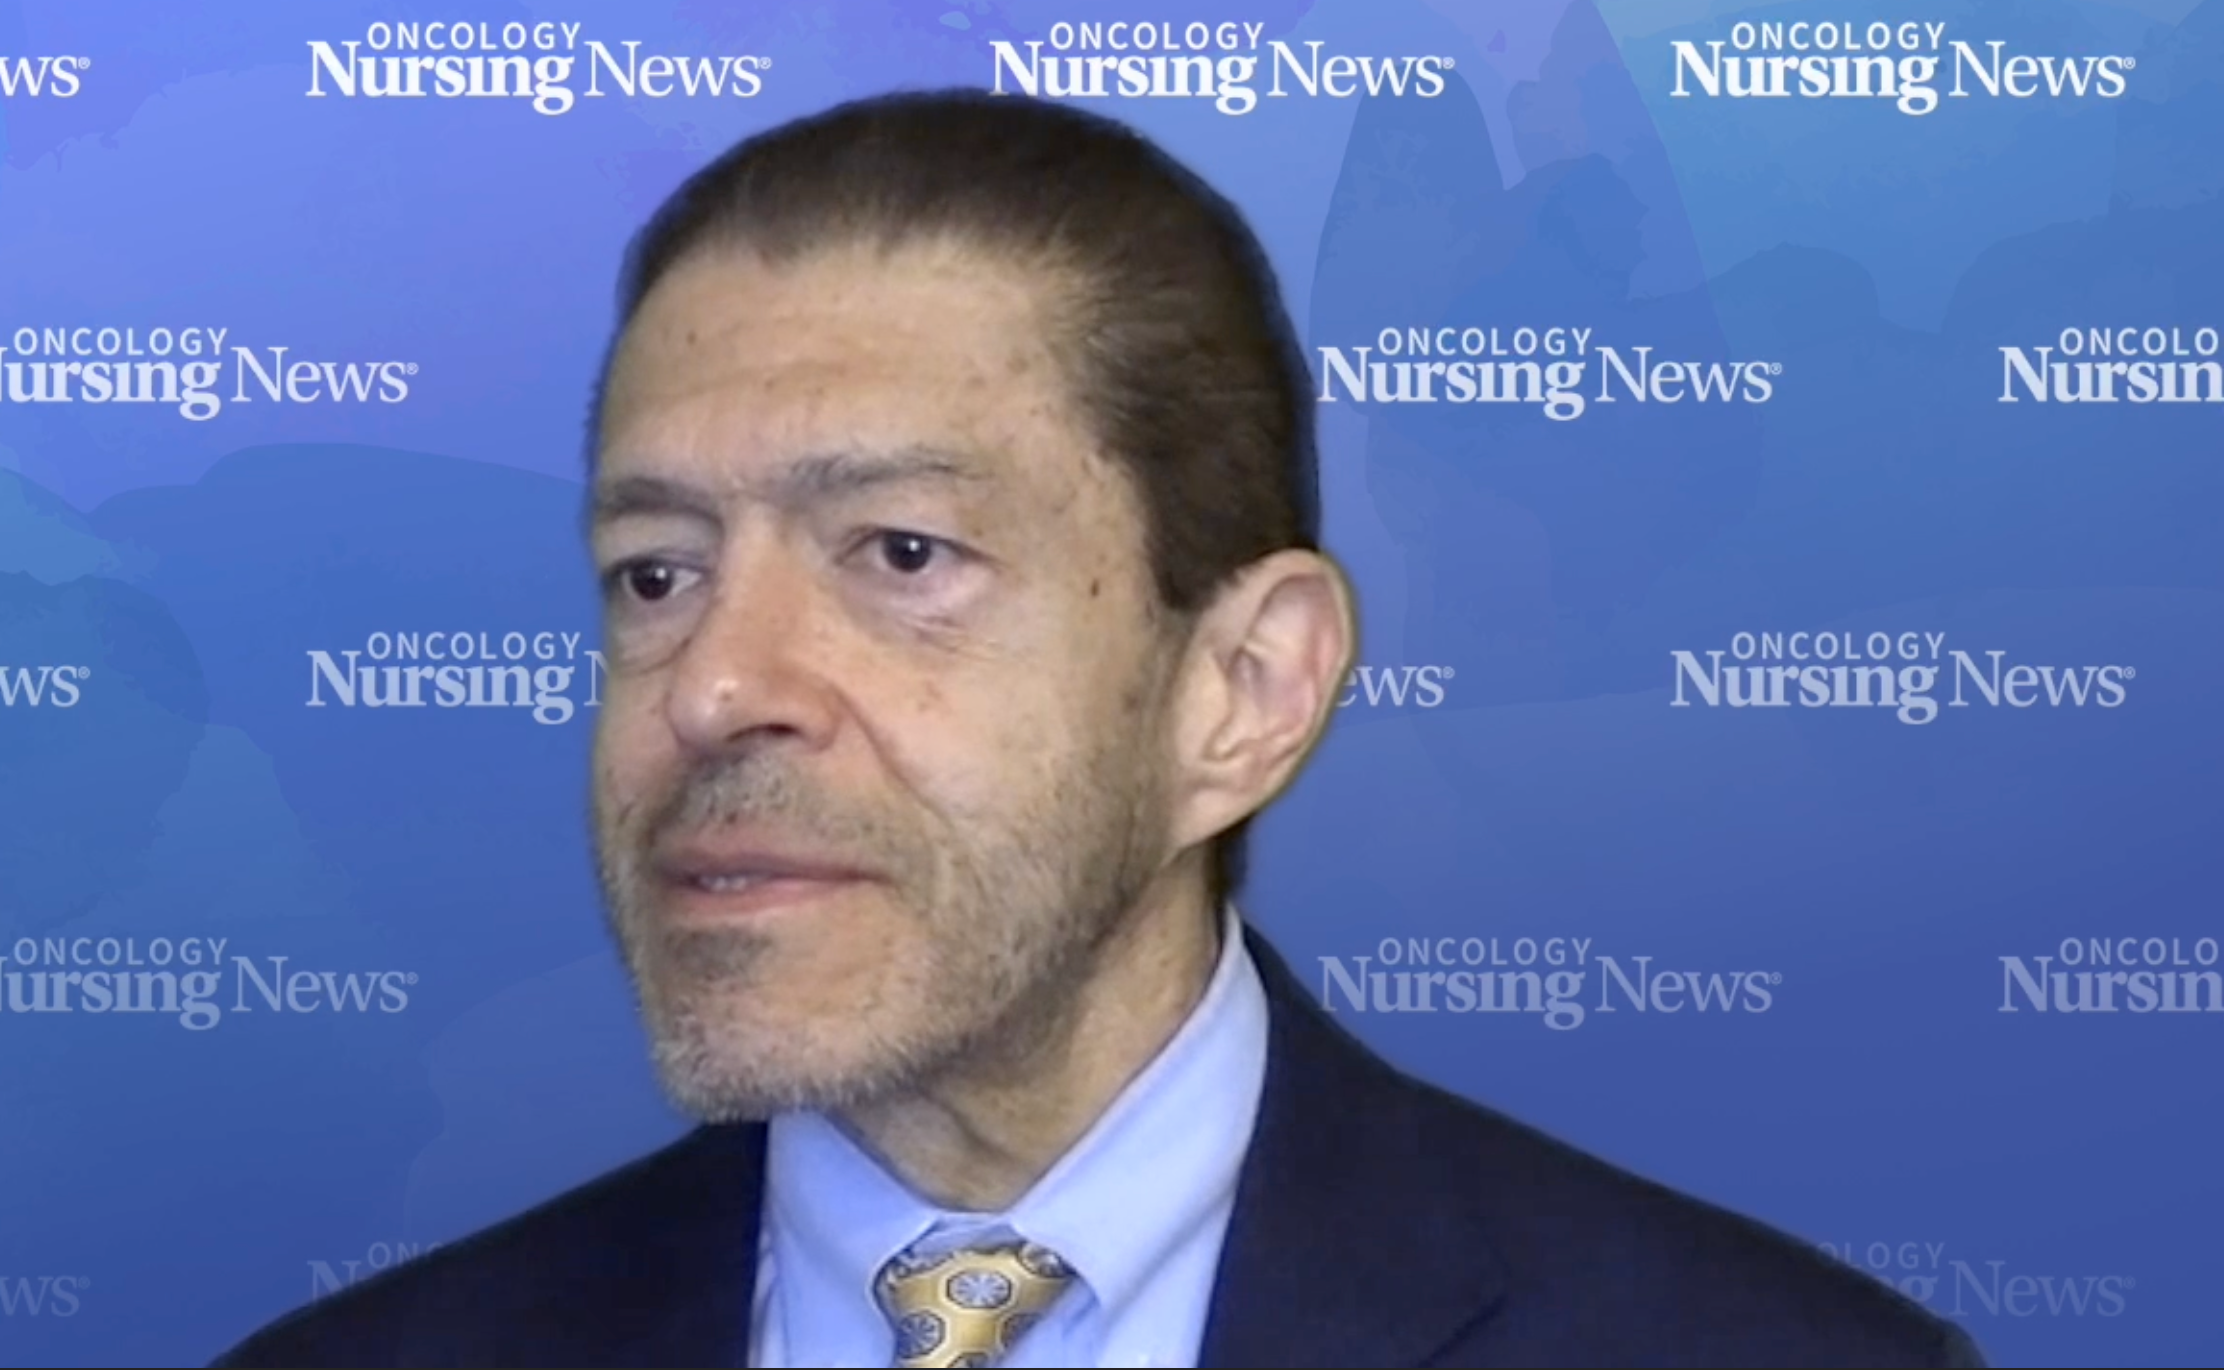 Normal Lifestyle May Continue for Most Patients During CML Treatment